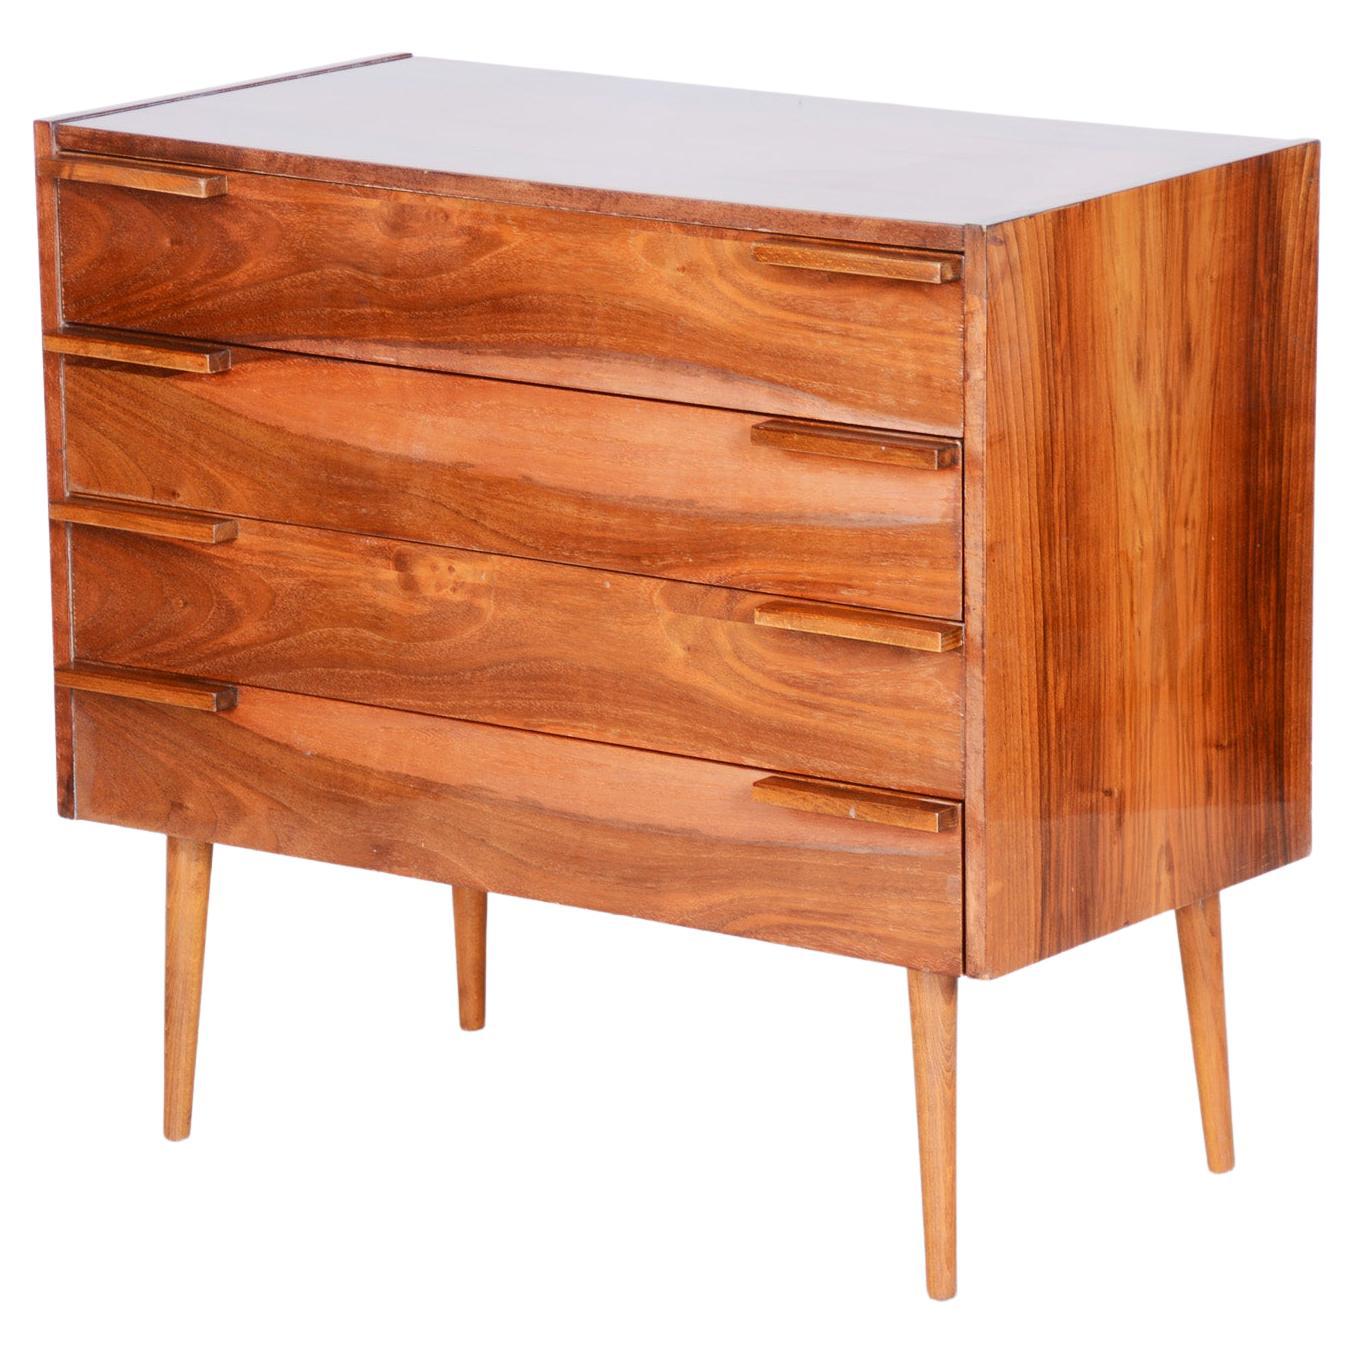 Mid Century Walnut Chest of Drawers, Commode, Made in Czechia, 1960s, Original For Sale